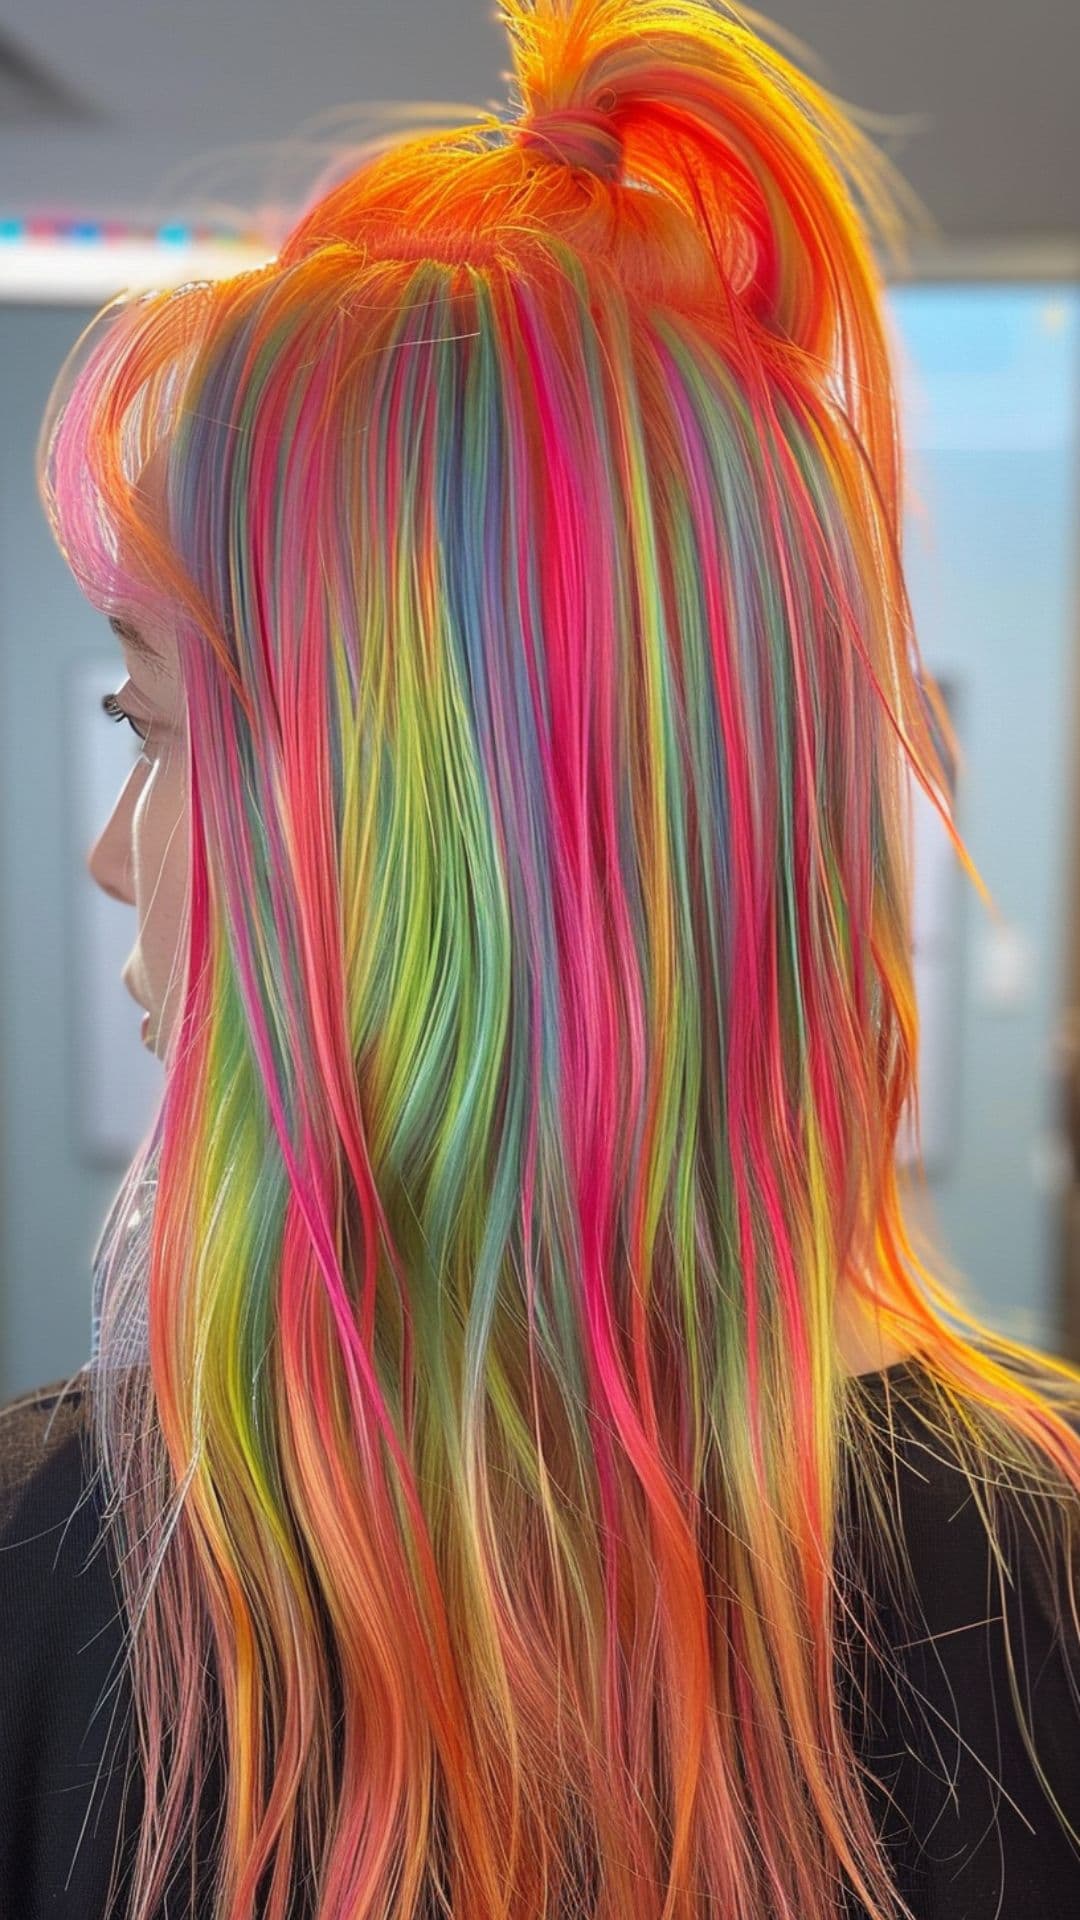 A young woman modelling a holographic hair.